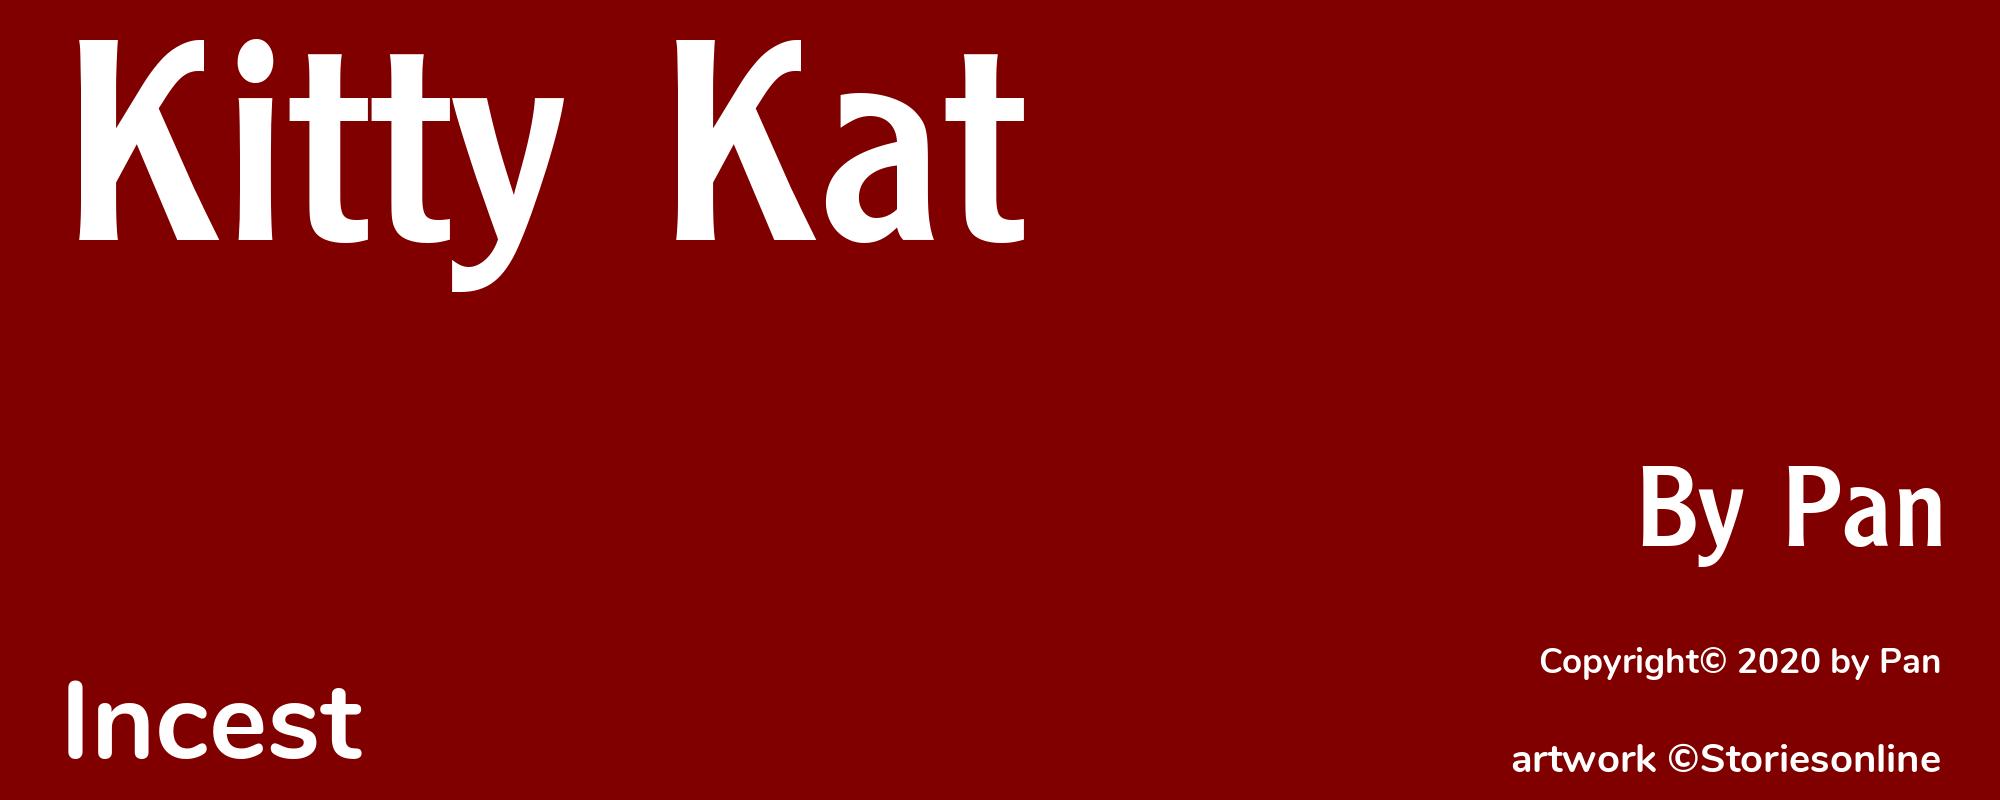 Kitty Kat - Cover